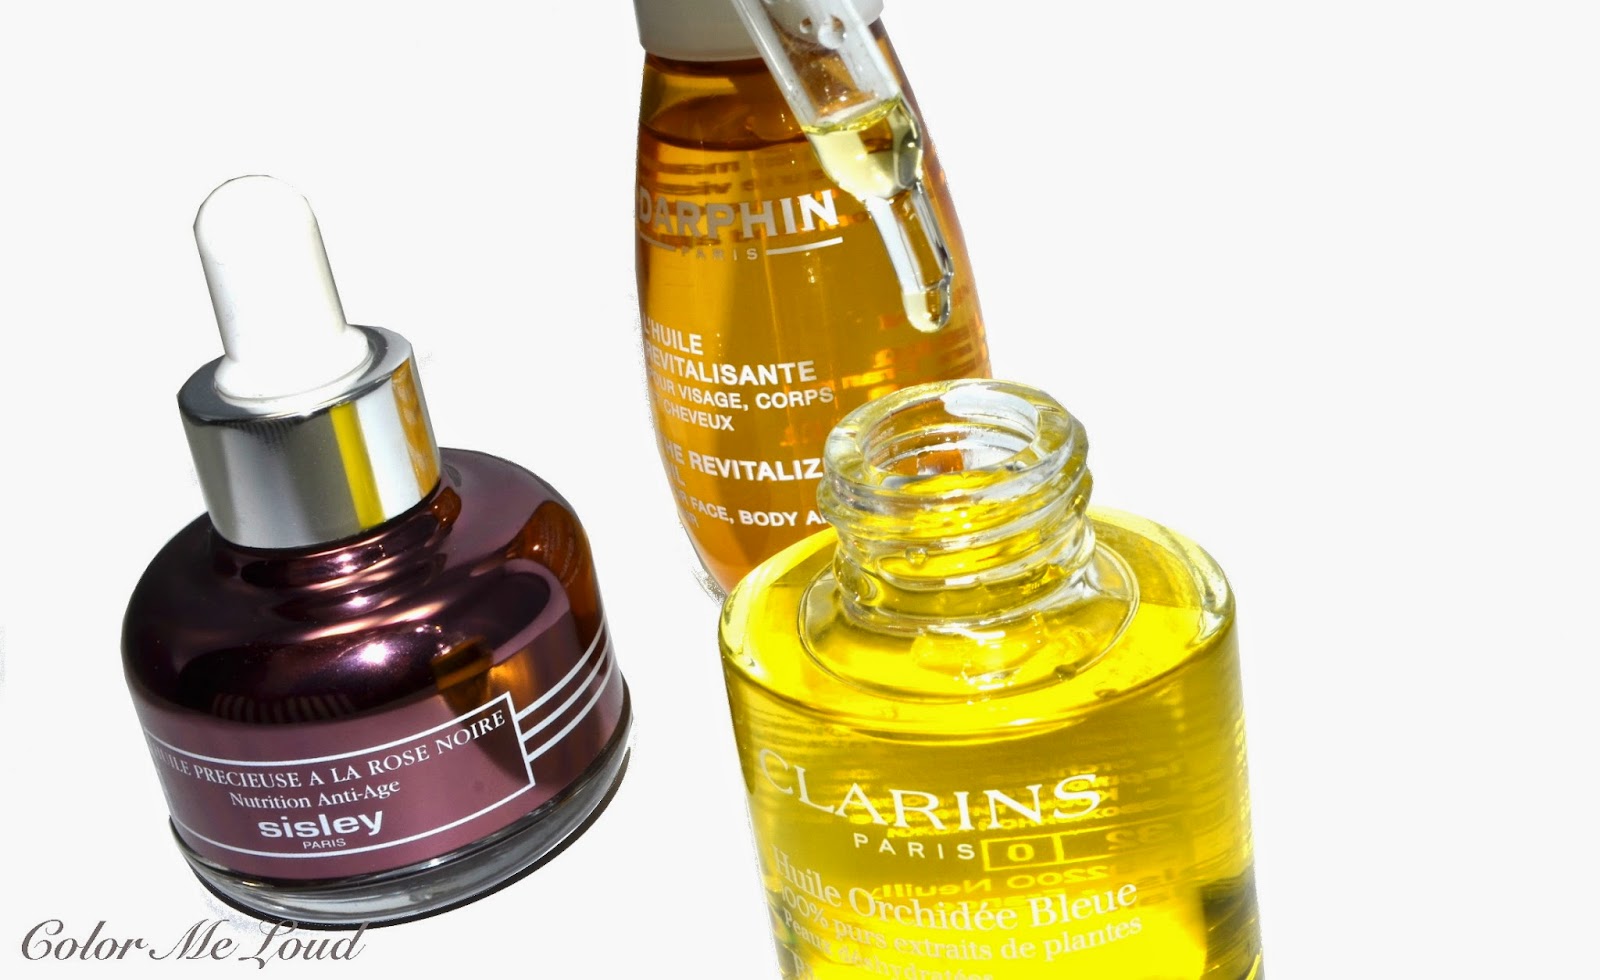 Guest Post: All About Facial Oils by Dr. Ebru from ChicScience